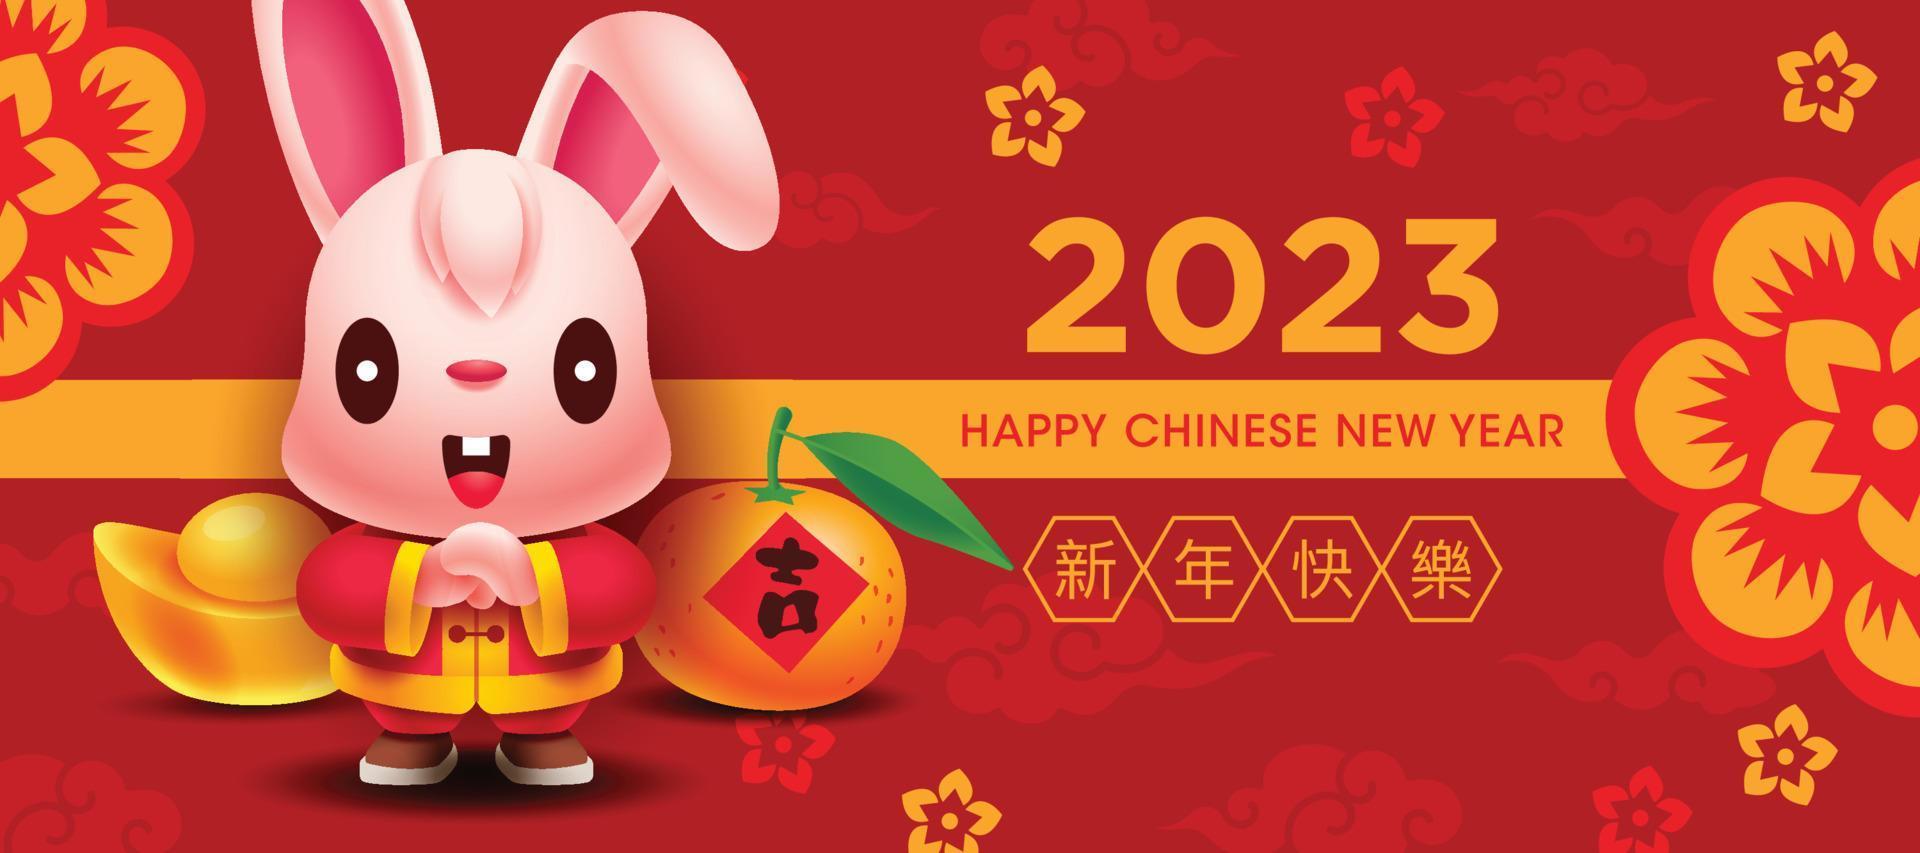 2023 Chinese New Year cute rabbit greeting banner vector